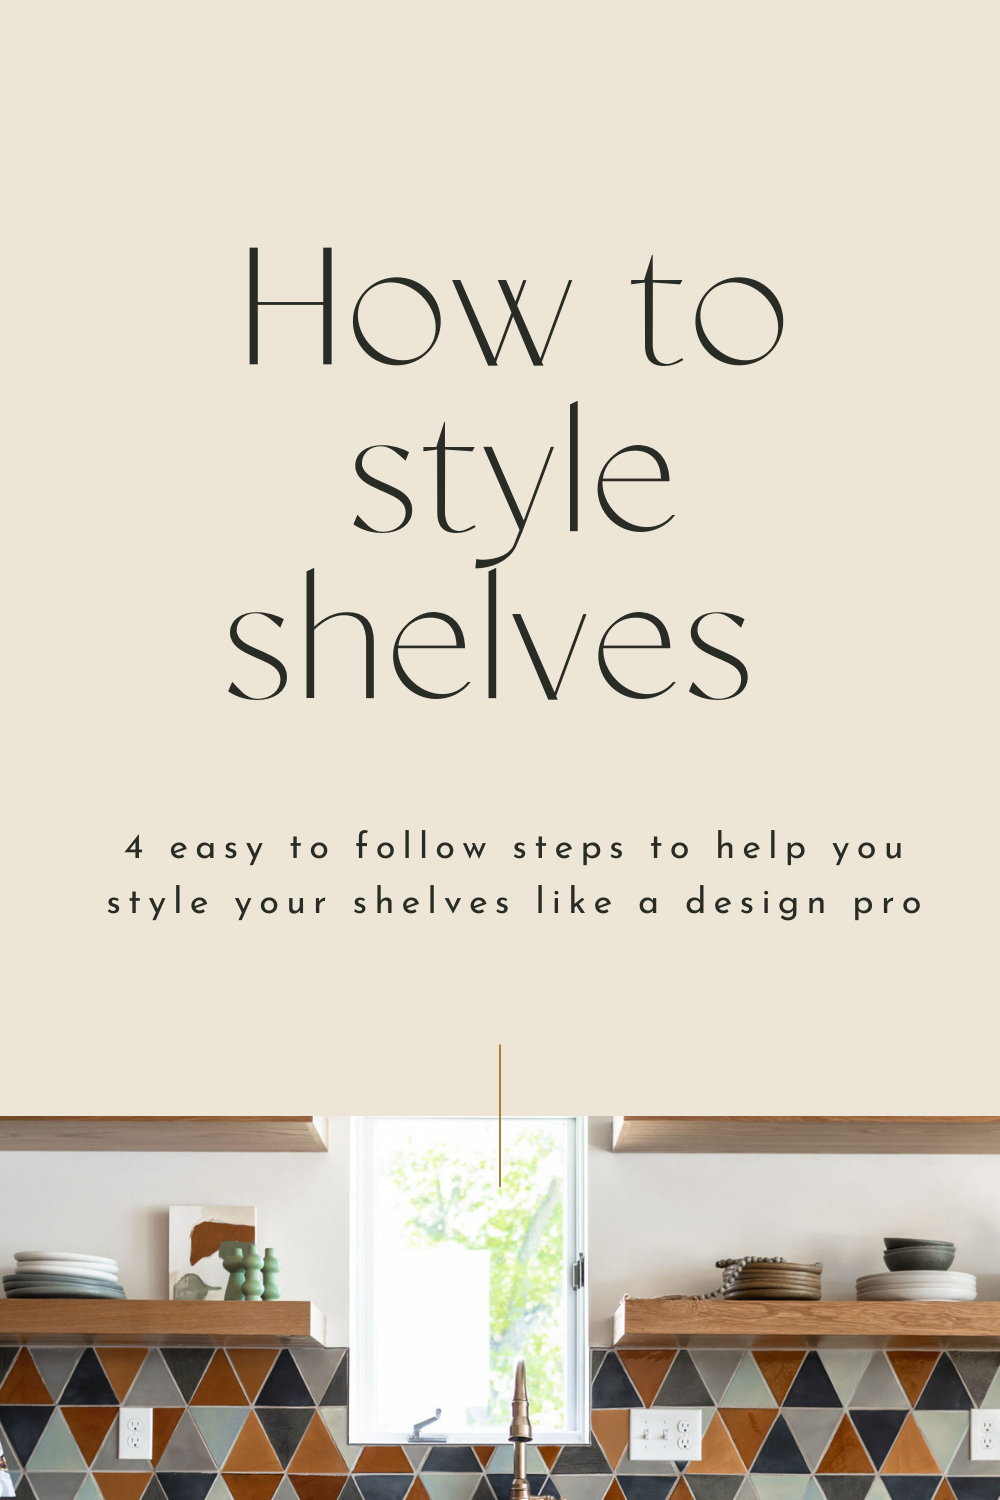 How to Style Shelves